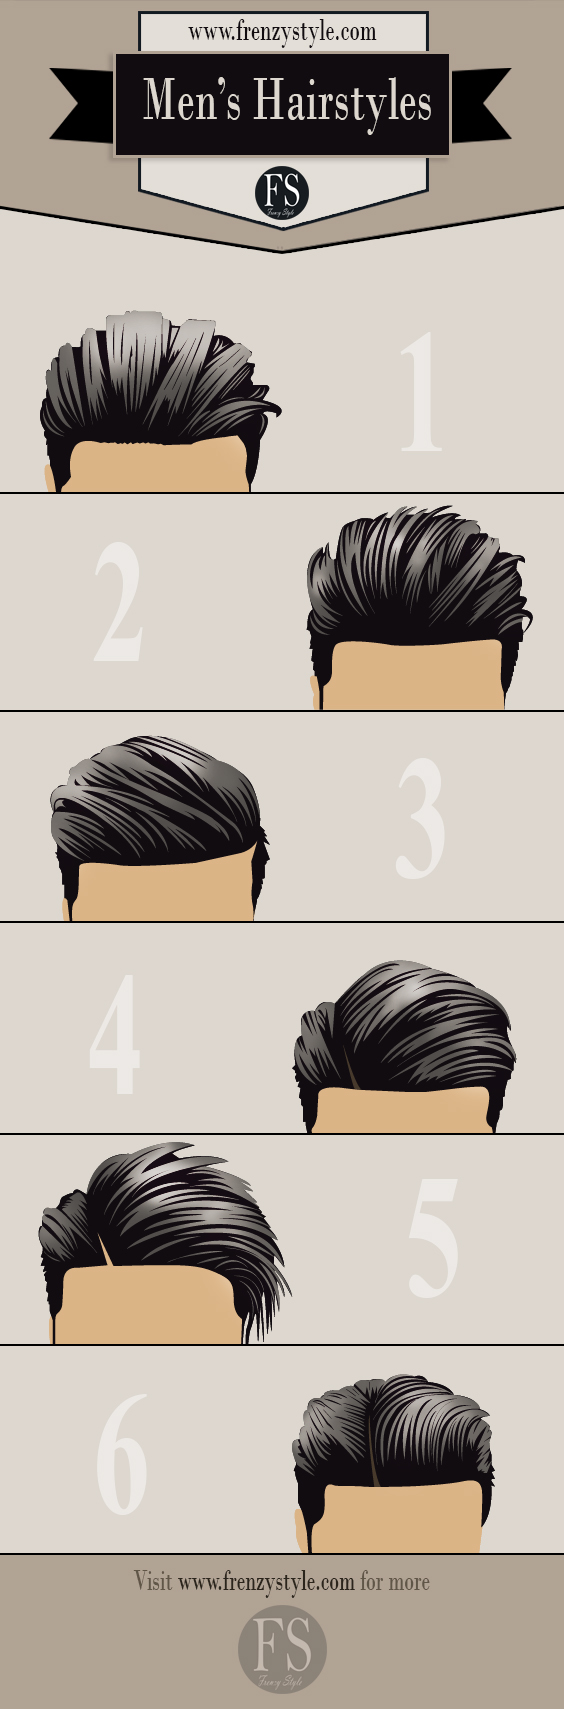 23 Popular Men's Hairstyles and Haircuts from Pinterest